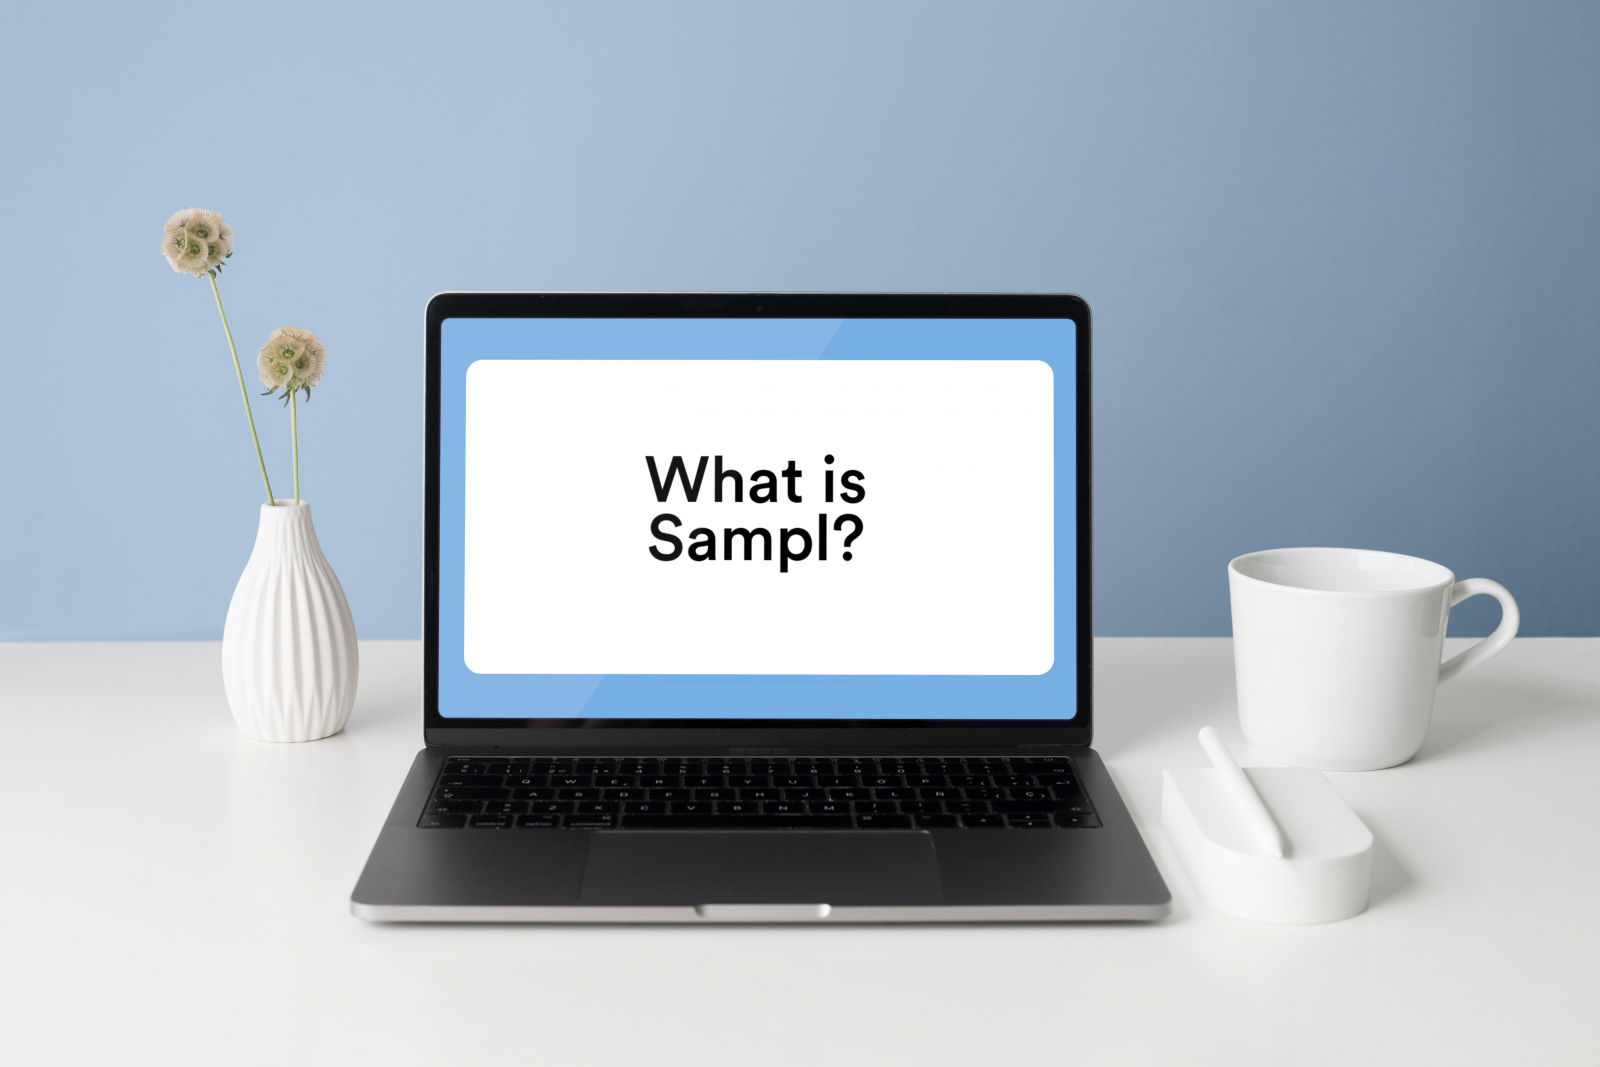 What is Sampl?